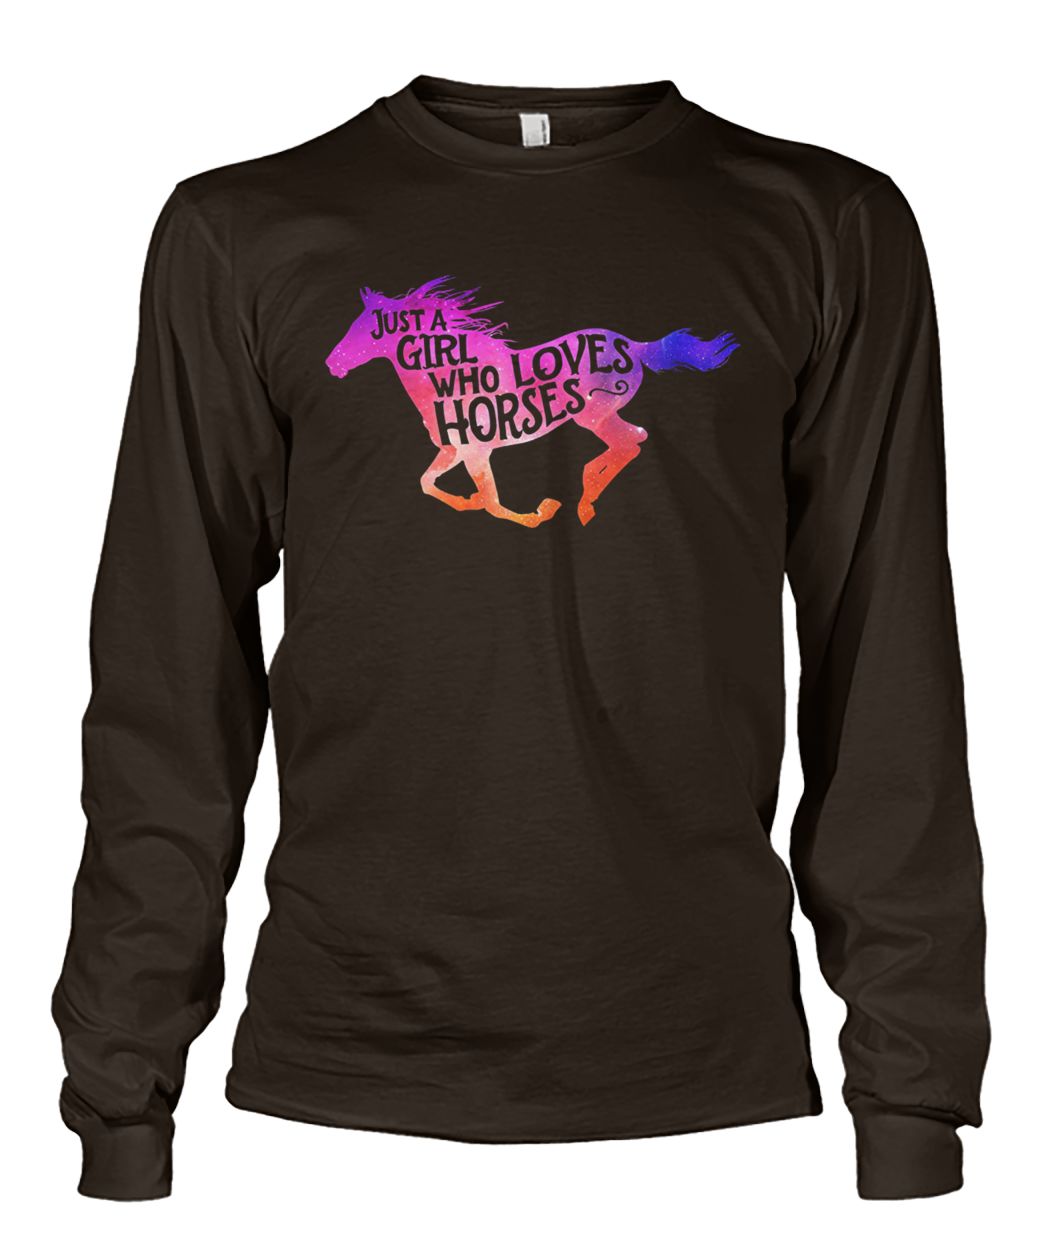 Horse riding just a girl who loves horses unisex long sleeve